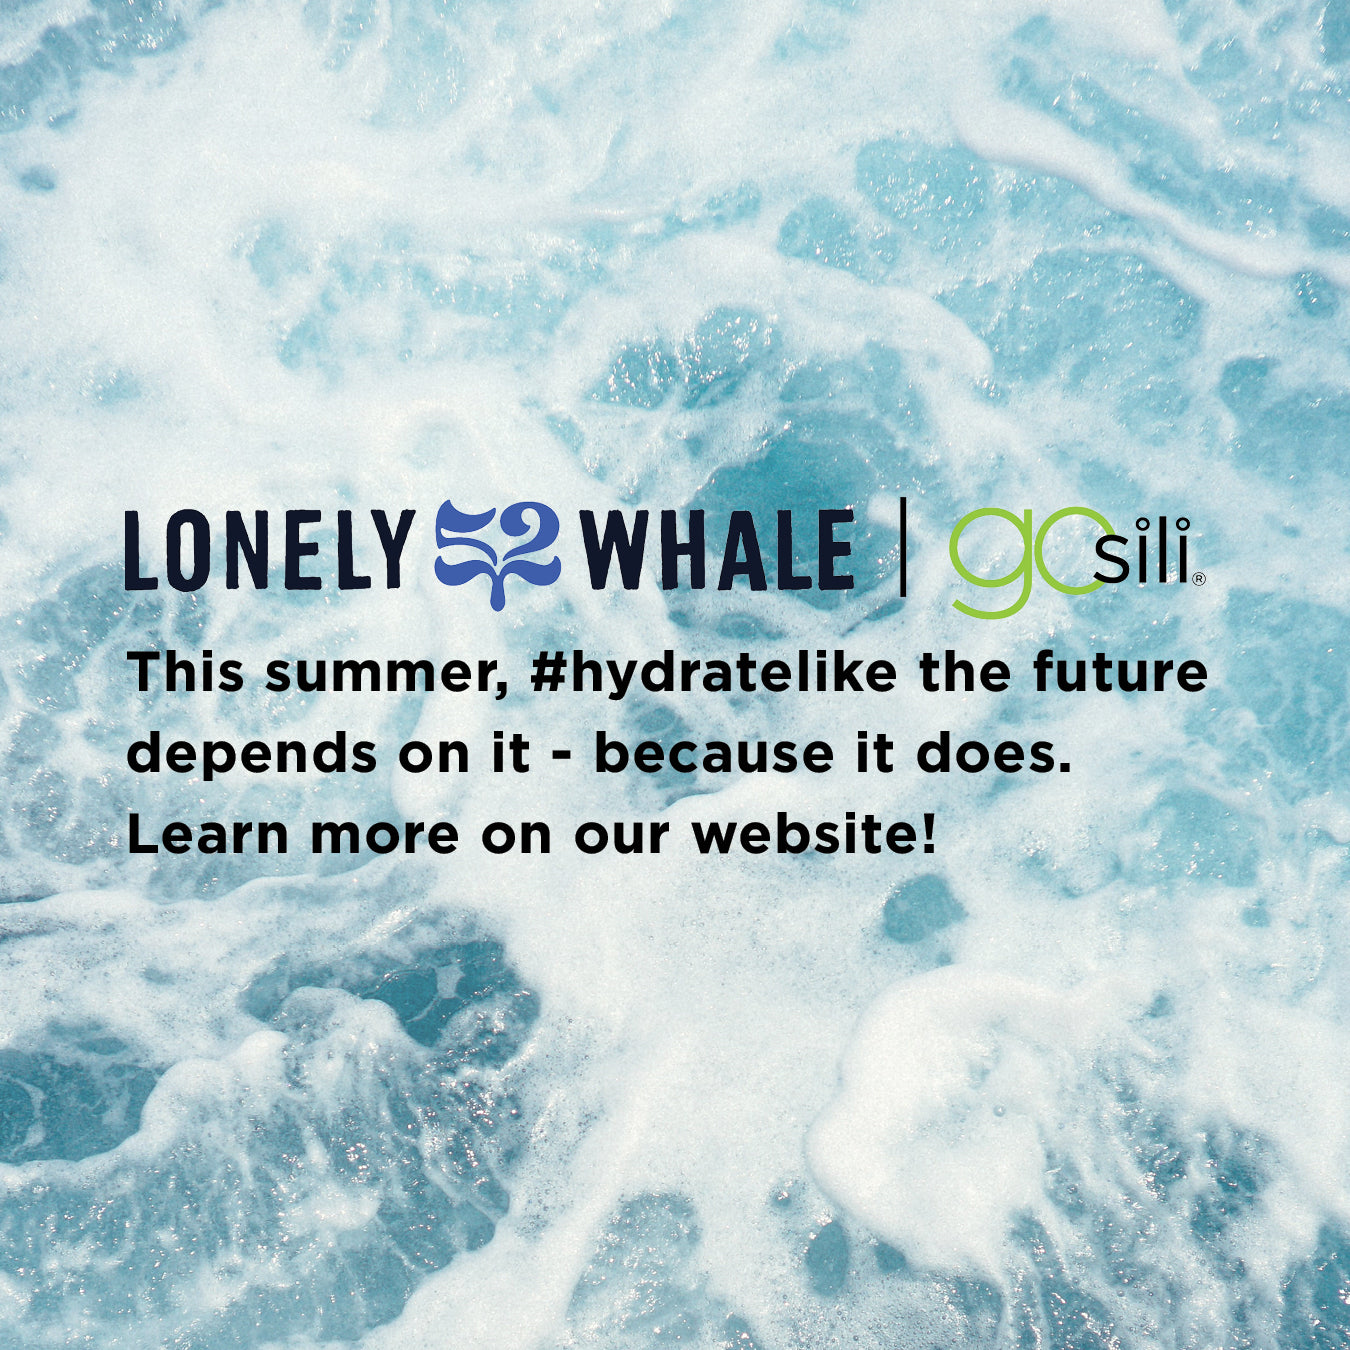 Lonely Whale and GoSili: A Partnership Creating Awareness to Save Our Oceans